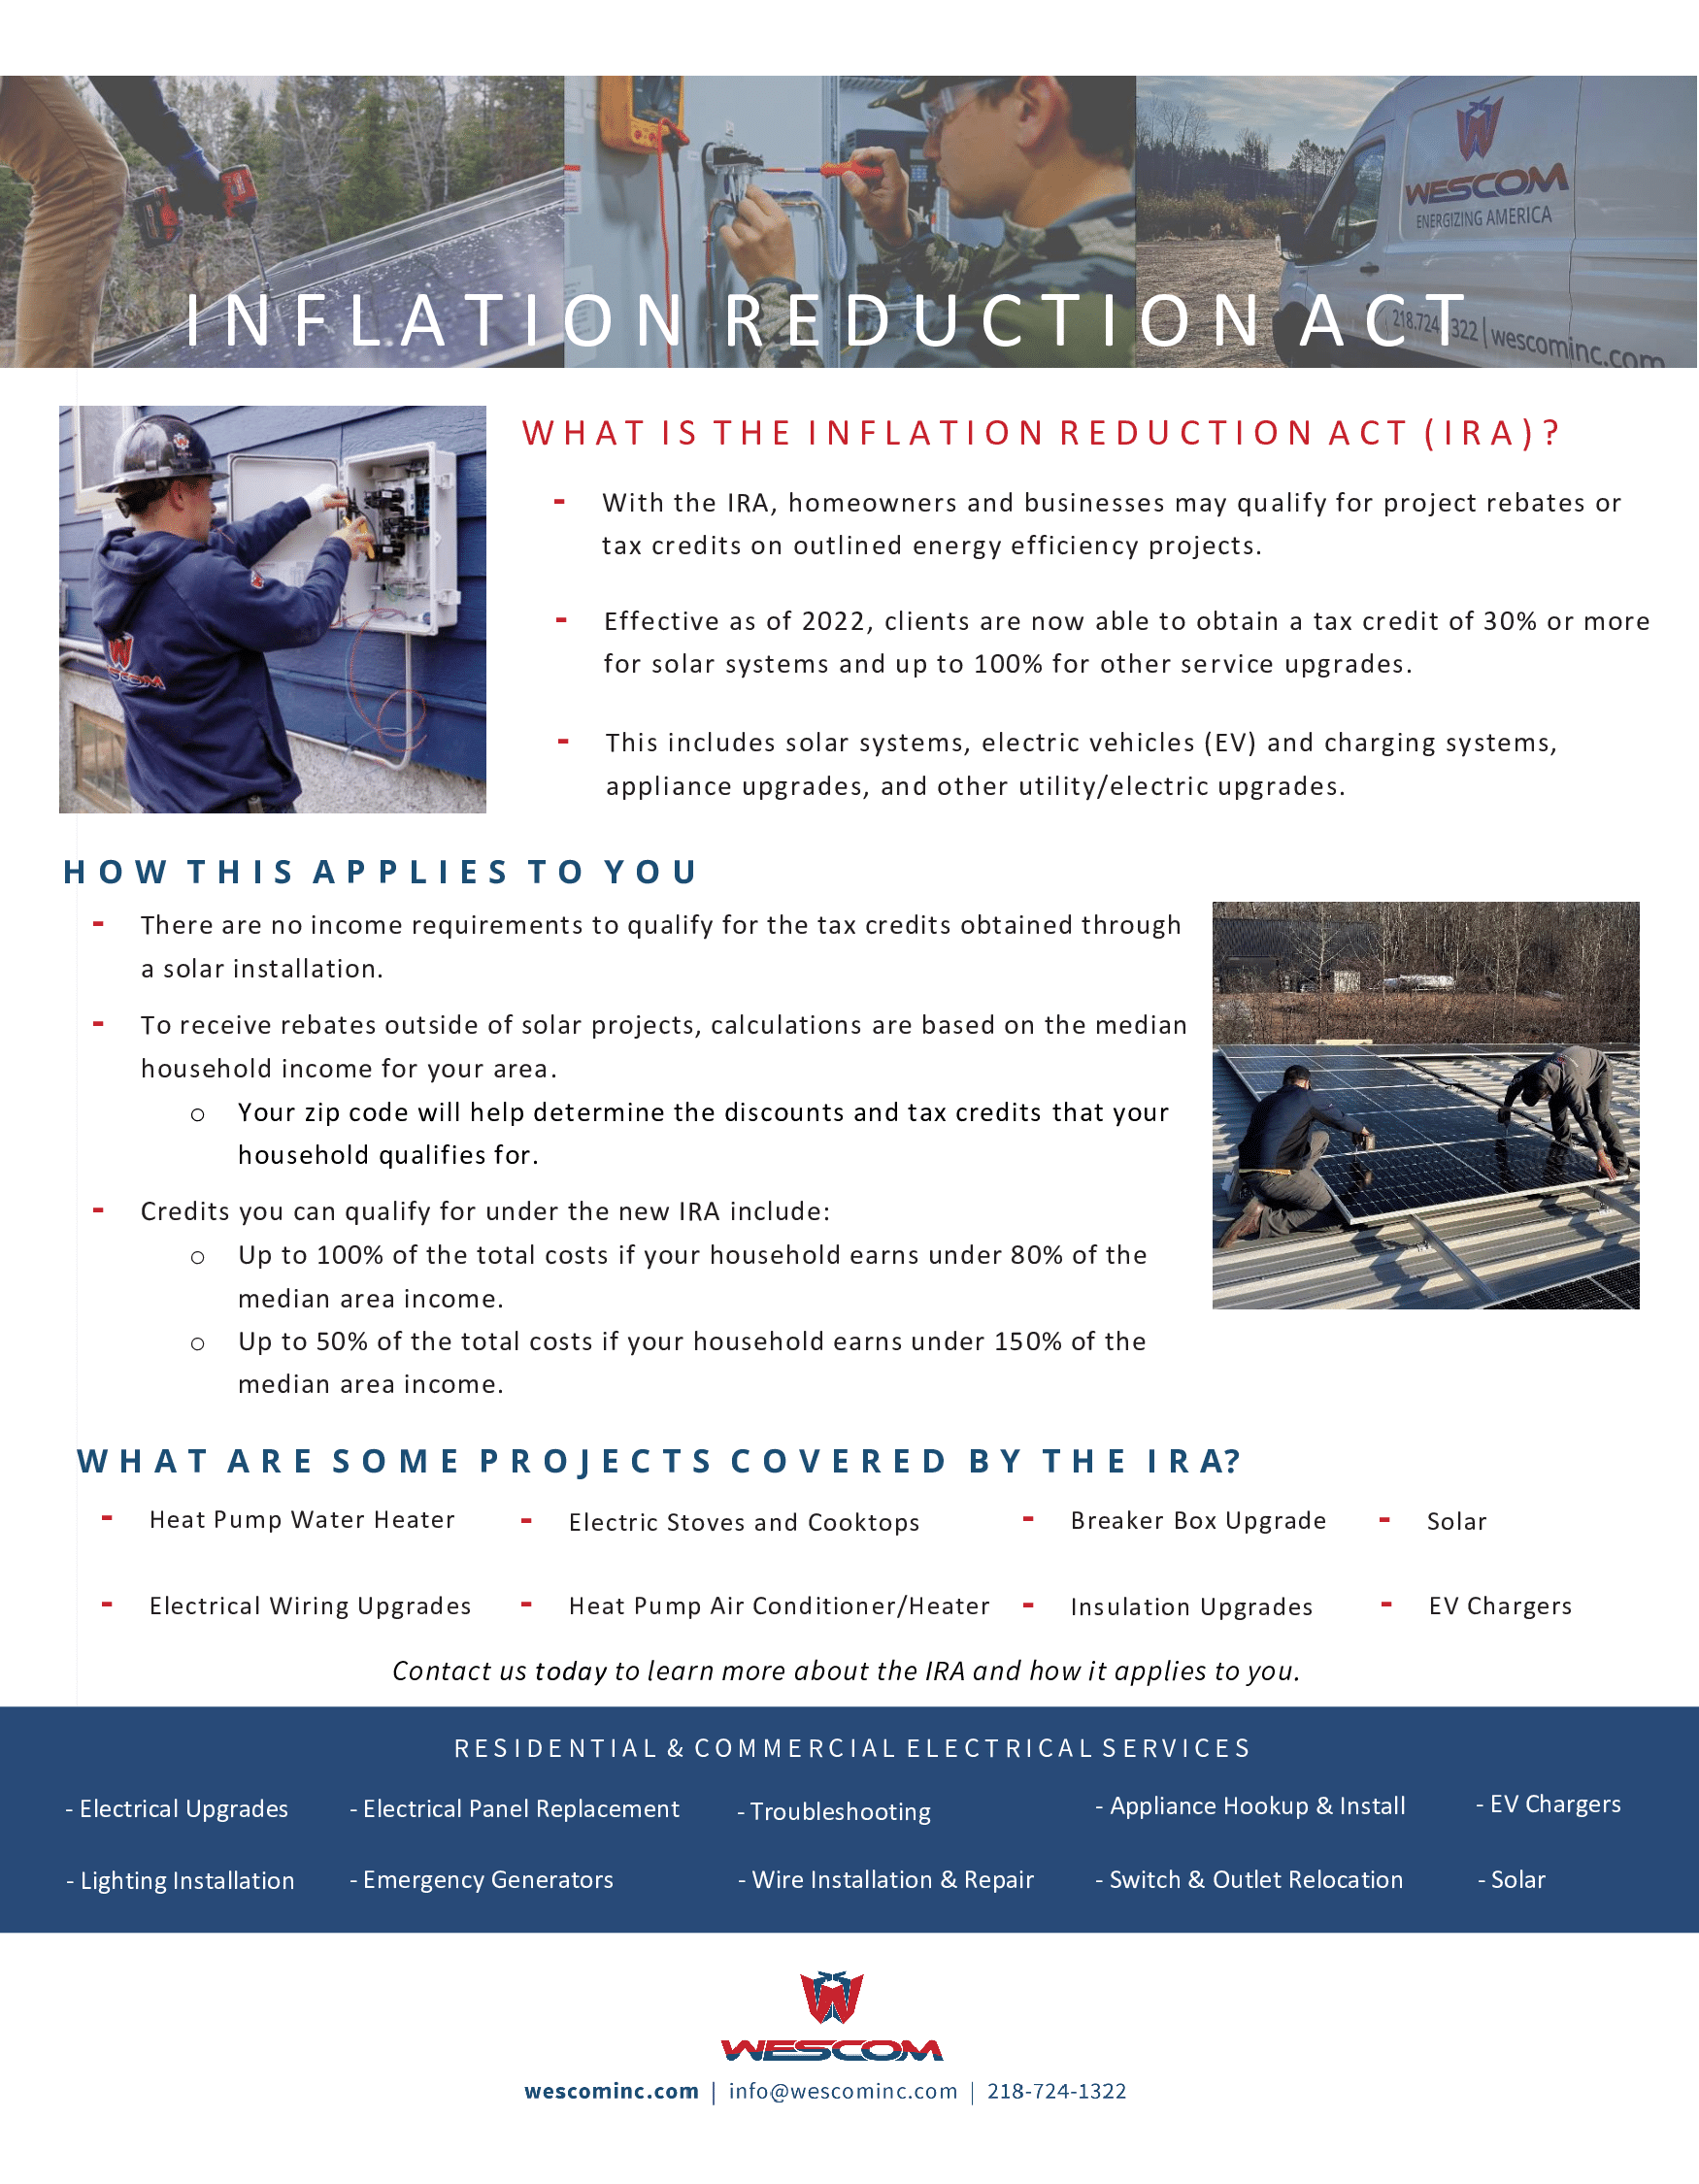 An Inflation Reduction Act Electrical and Solar Services Handout.